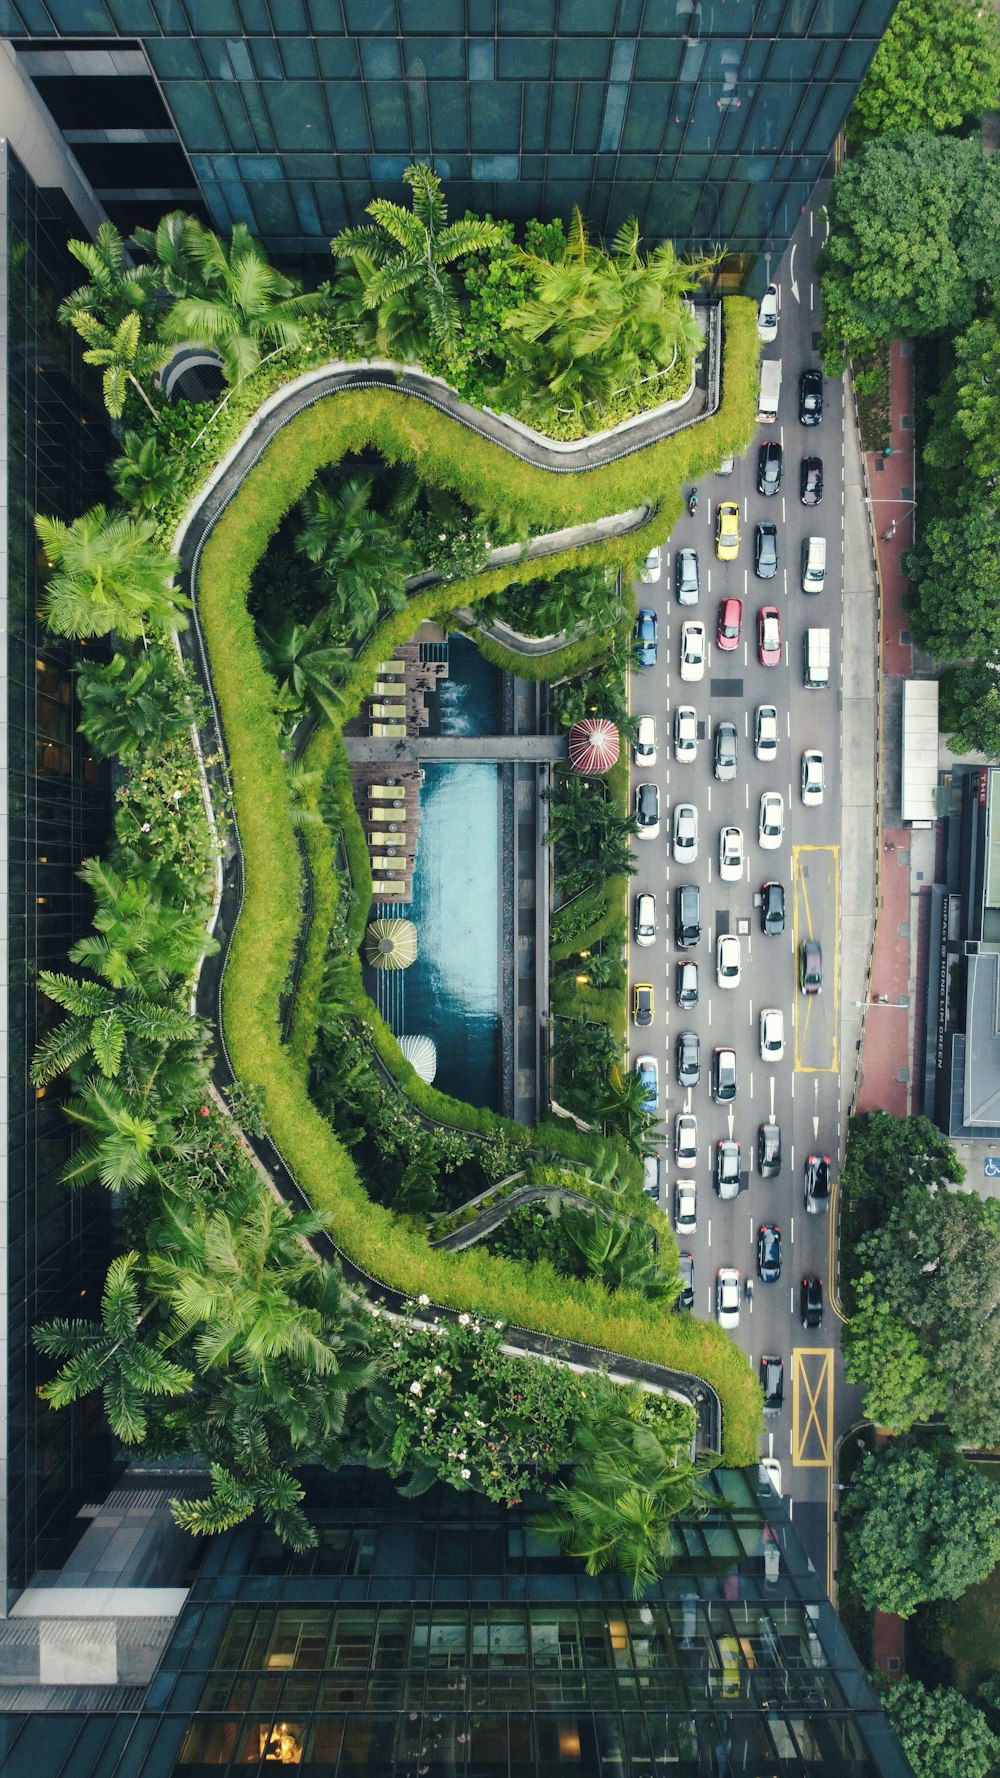 an aerial view of a city street with cars and trees